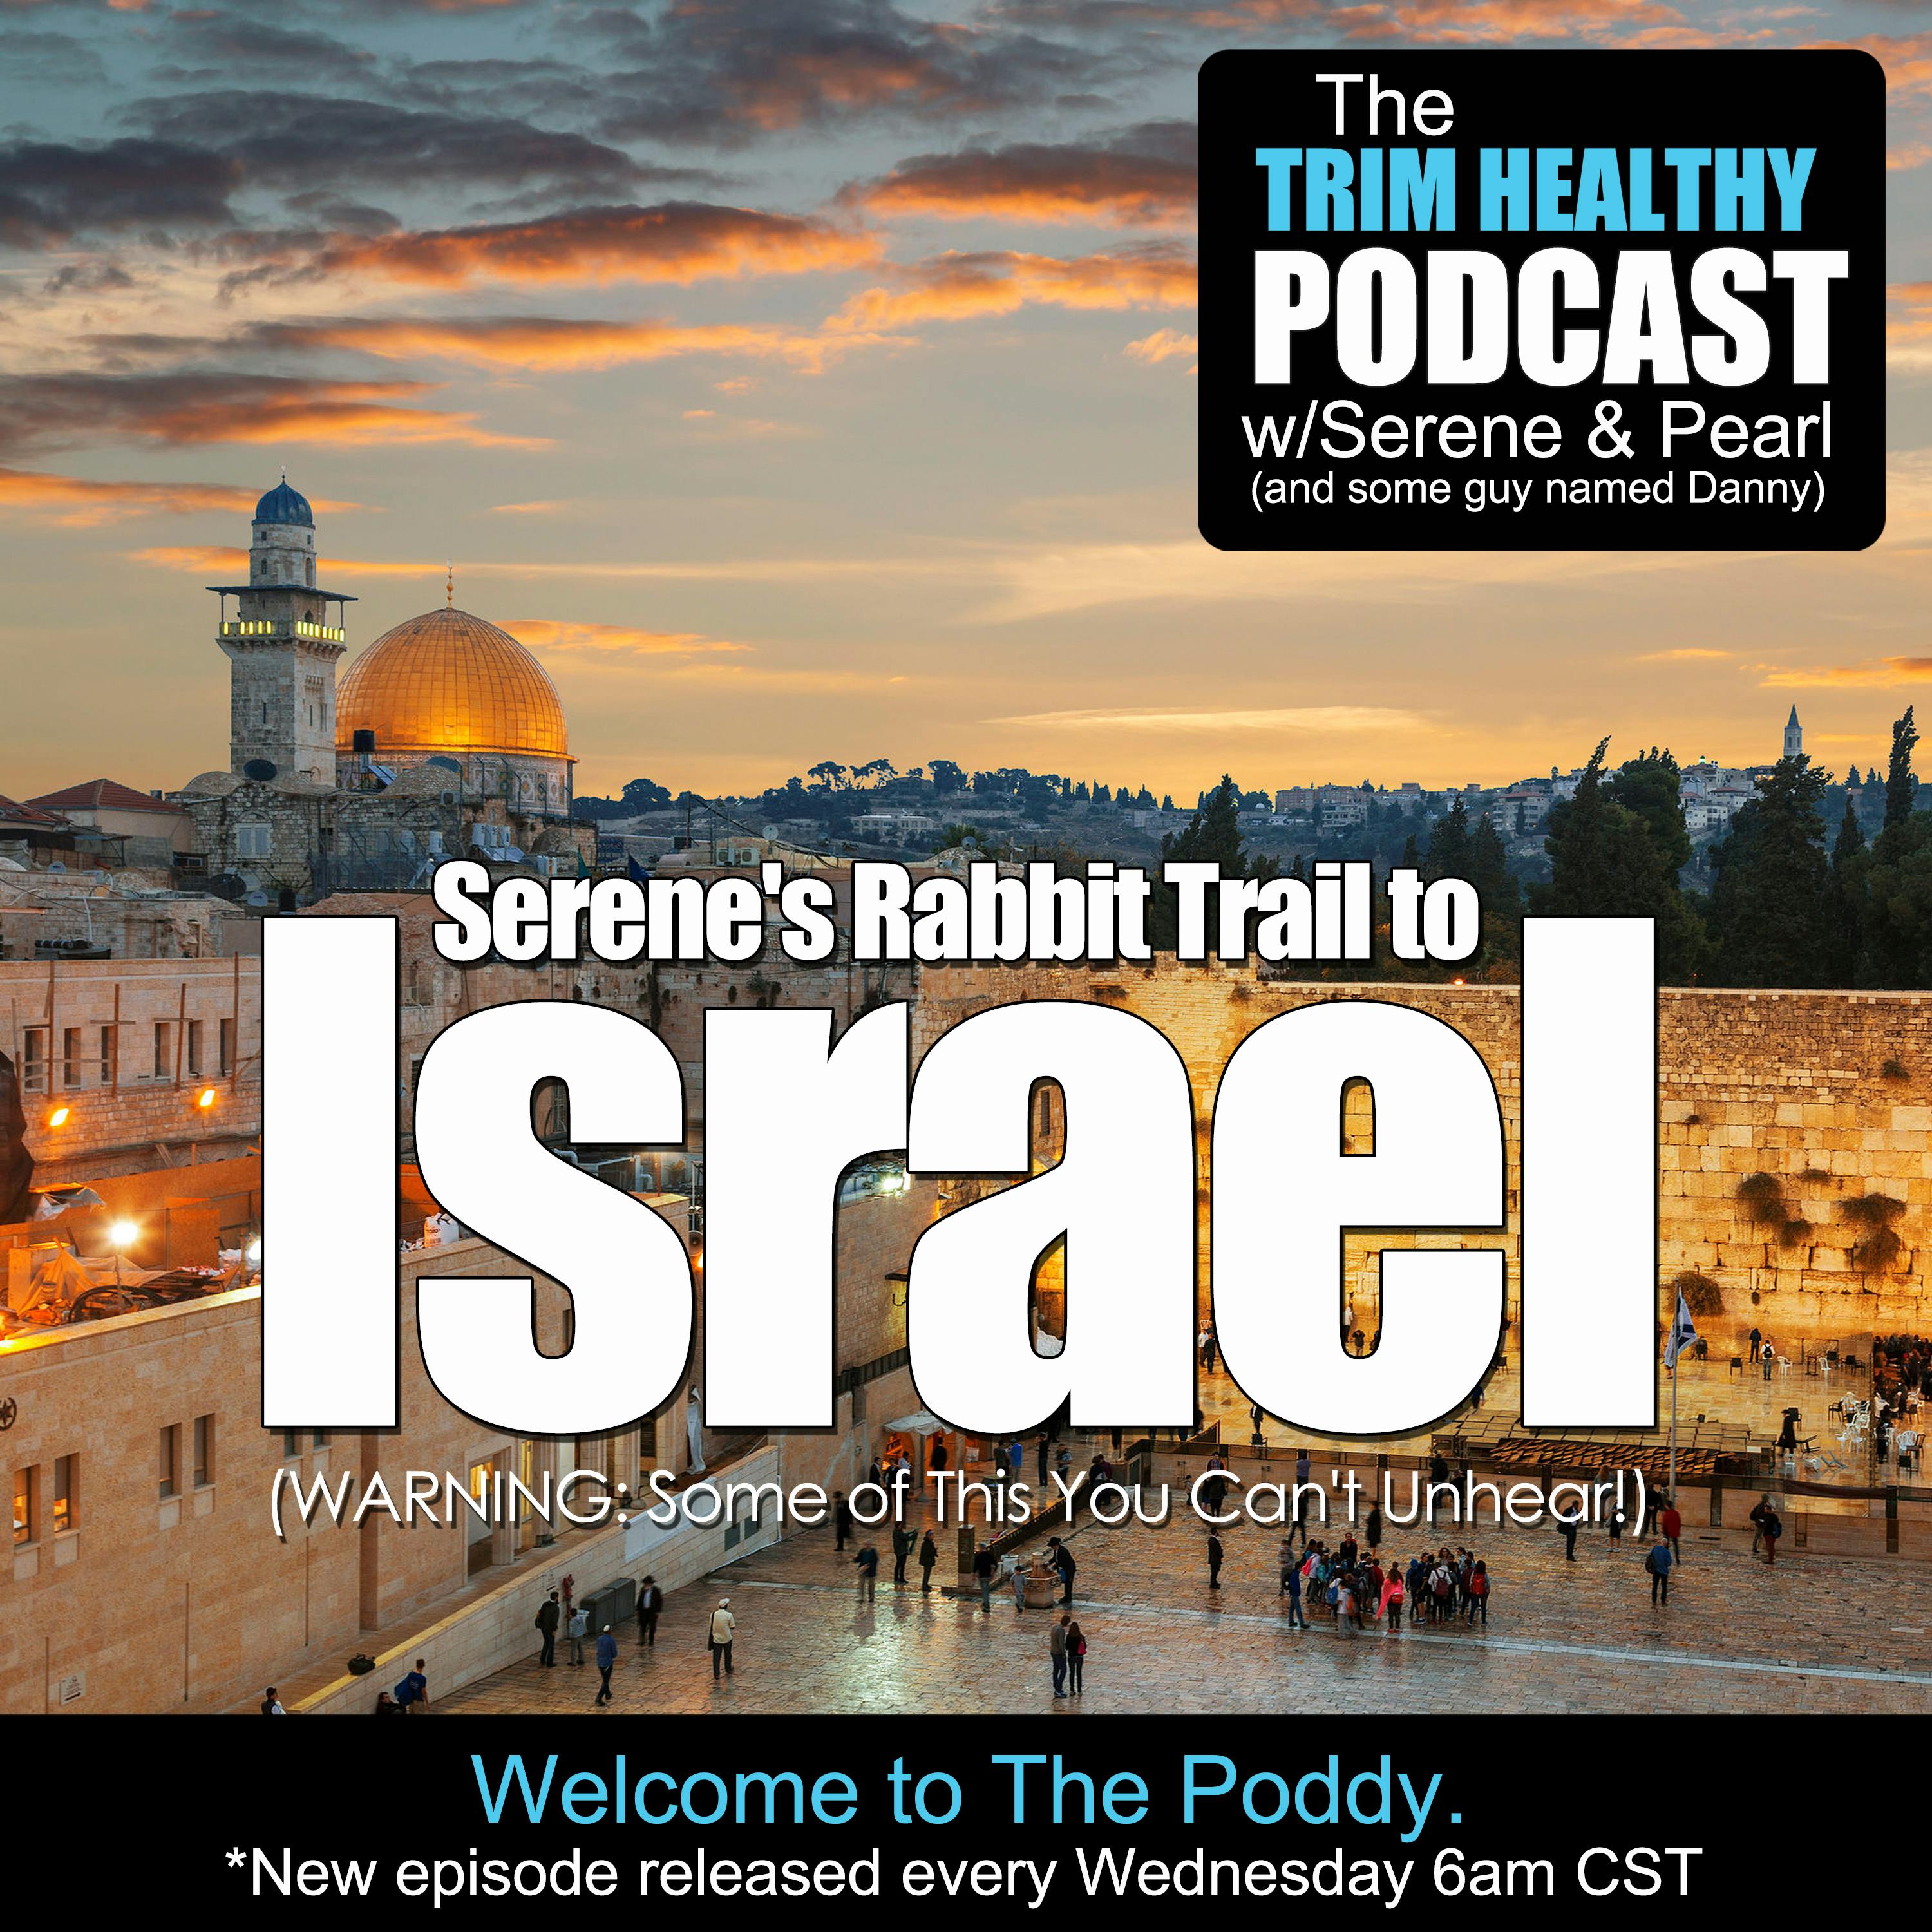 Ep 158: Serene’s Rabbit Trail to Israel. (WARNING: Some of This You Can’t Unhear!)